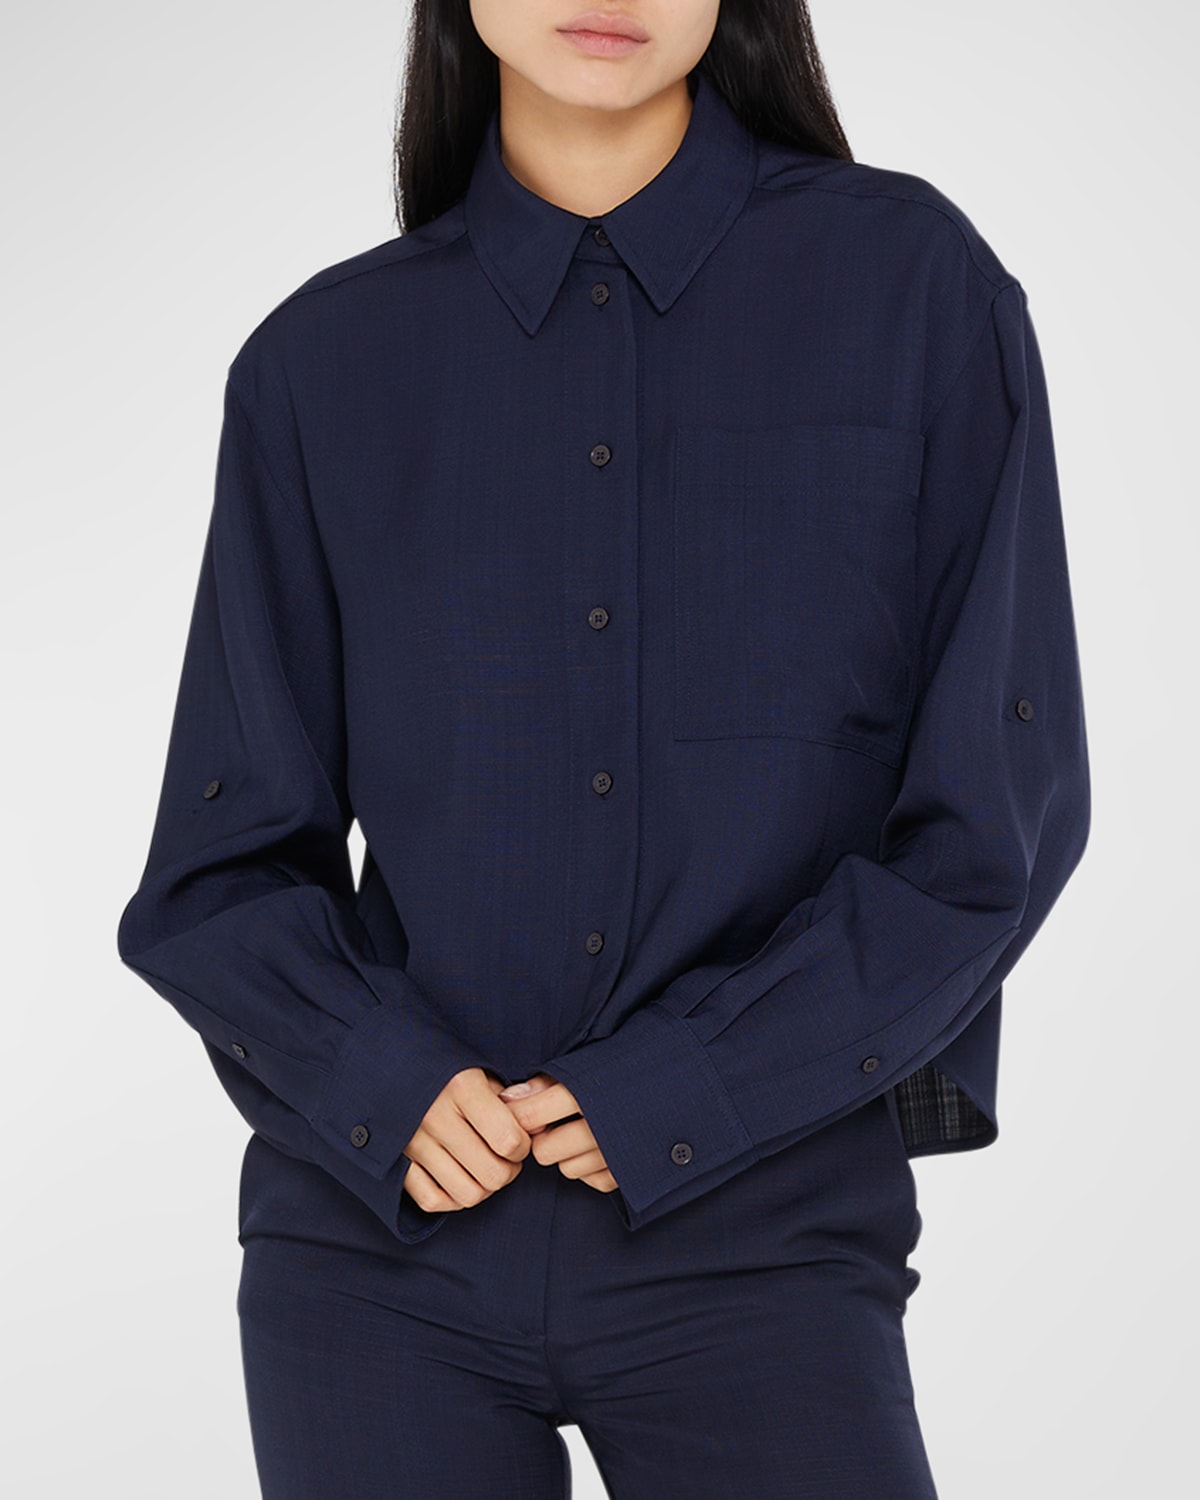 VICTORIA BECKHAM CROPPED BUTTON-FRONT SHIRT WITH BUTTON SLEEVES